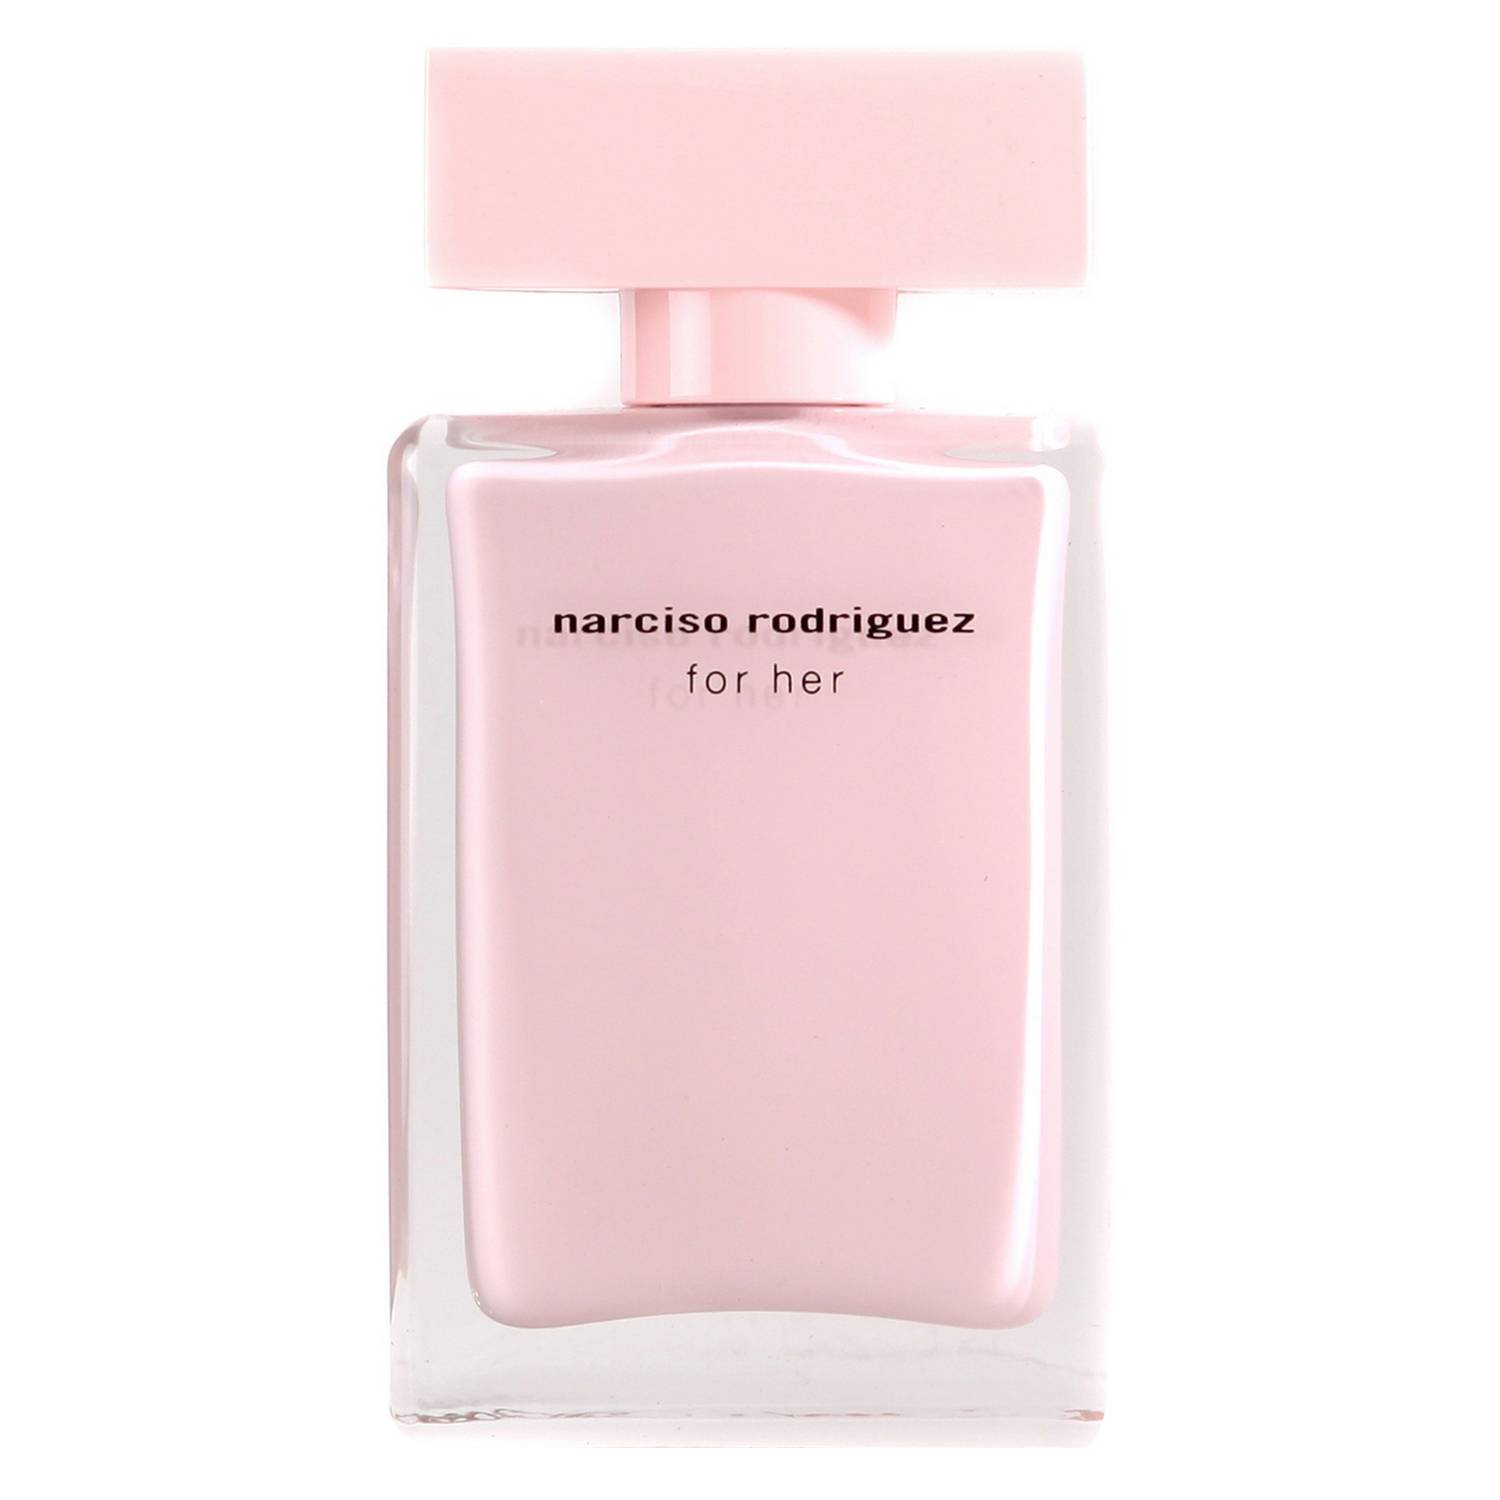 All of me narciso rodriguez. For her – Narciso Rodriguez 2003. Narciso Rodriguez for her 100ml. Нарциссо Родригес розовые. Парфюм Rodriguez Narciso 50мл.